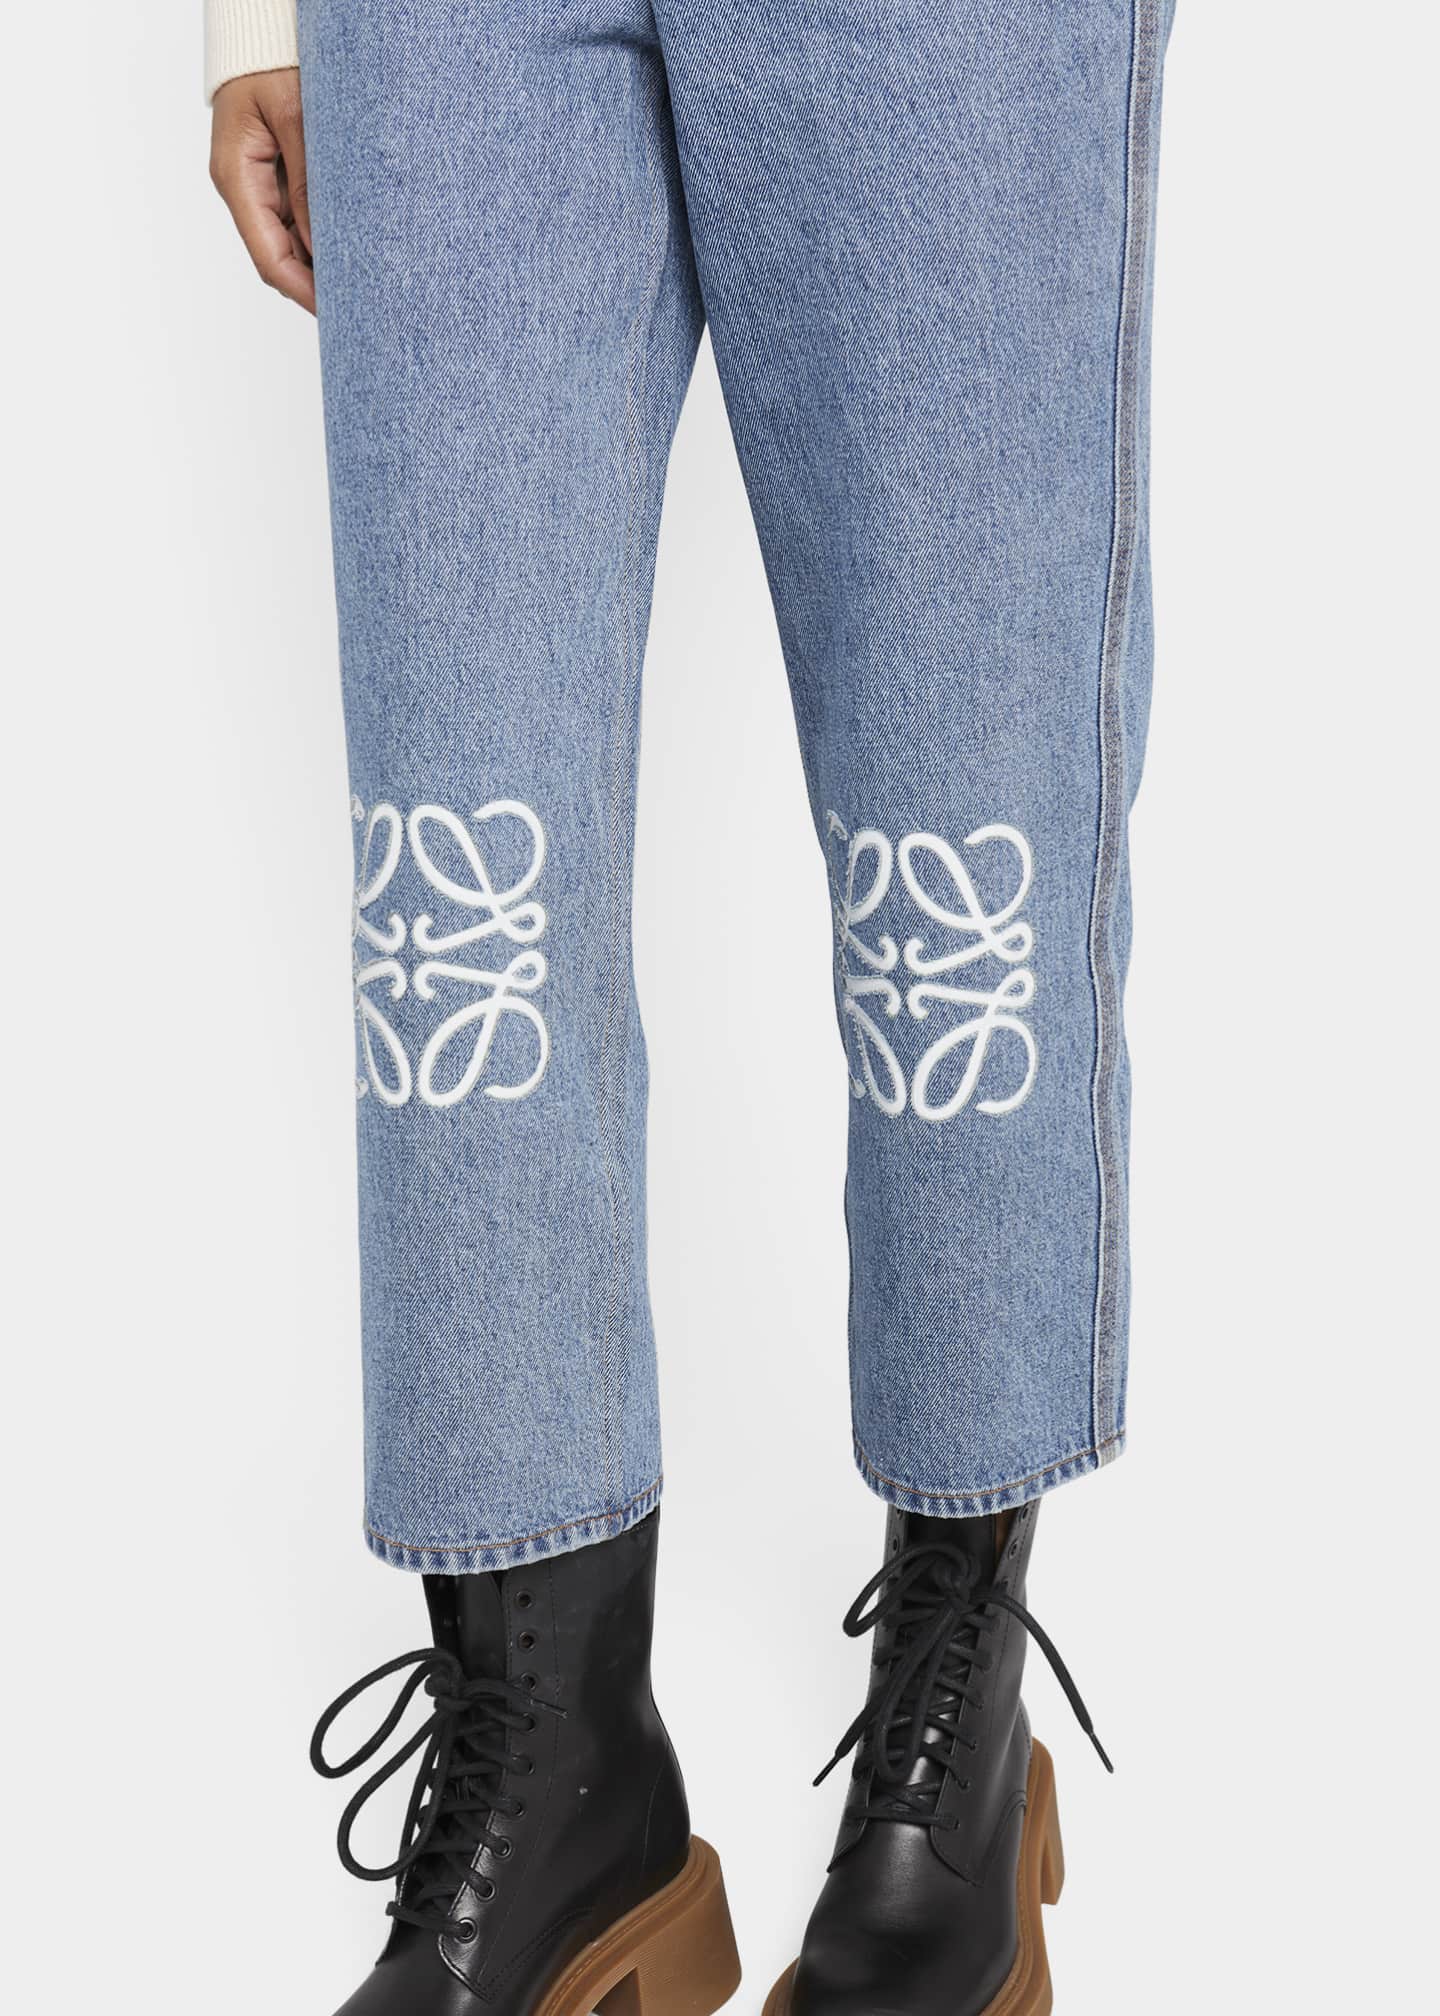 Loewe Anagram Embroidered Cropped Jeans - Bergdorf Goodman